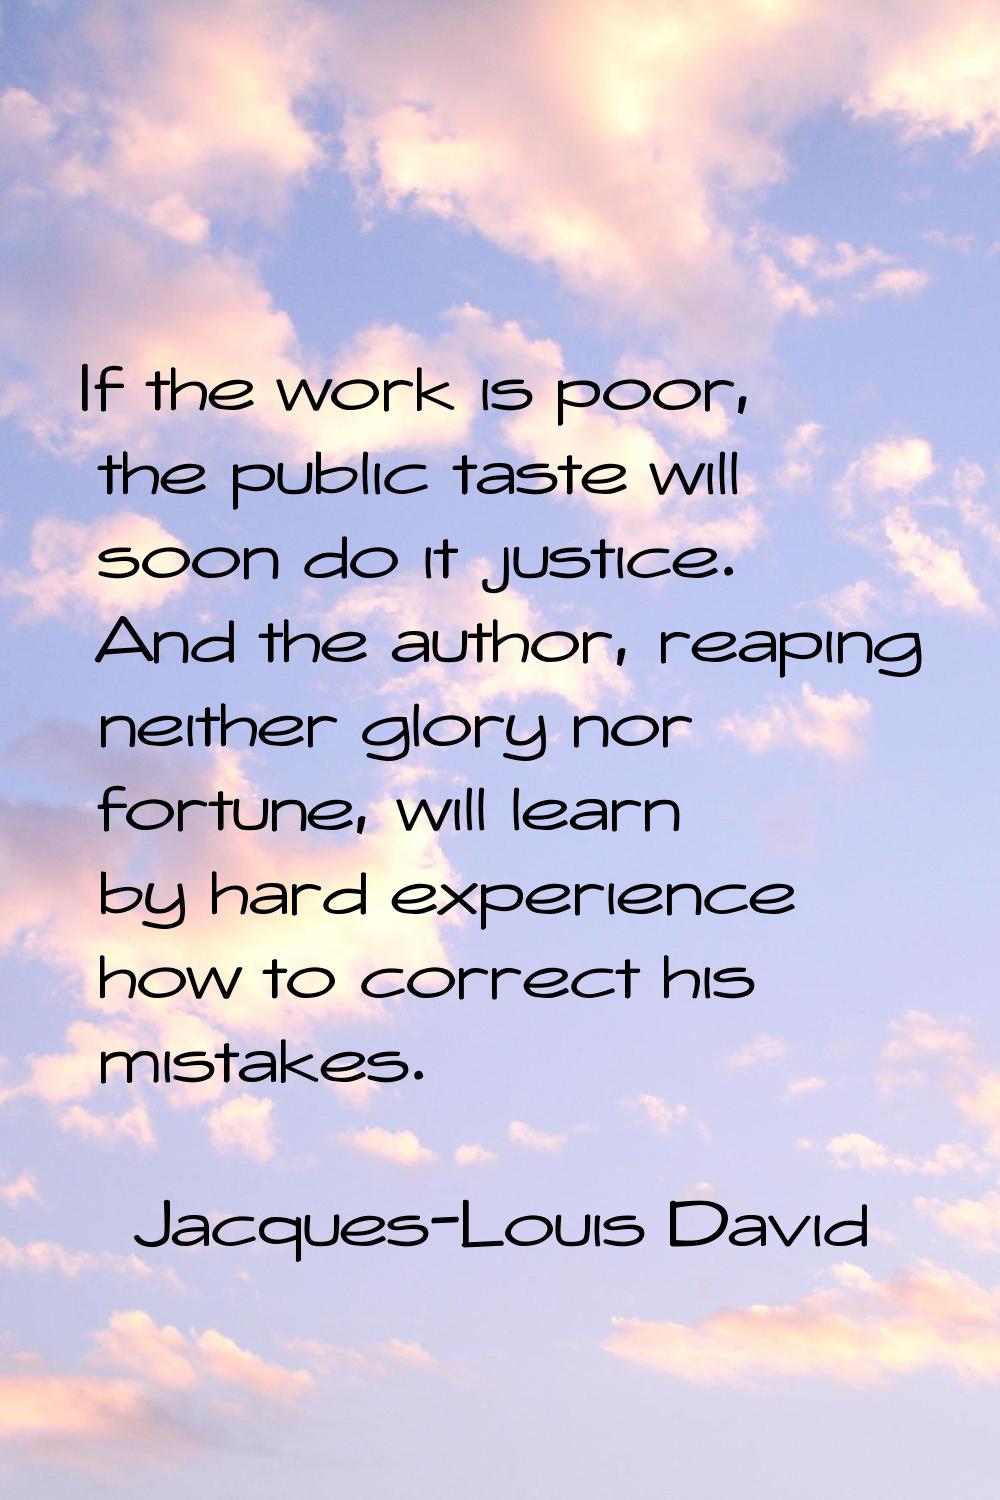 If the work is poor, the public taste will soon do it justice. And the author, reaping neither glor